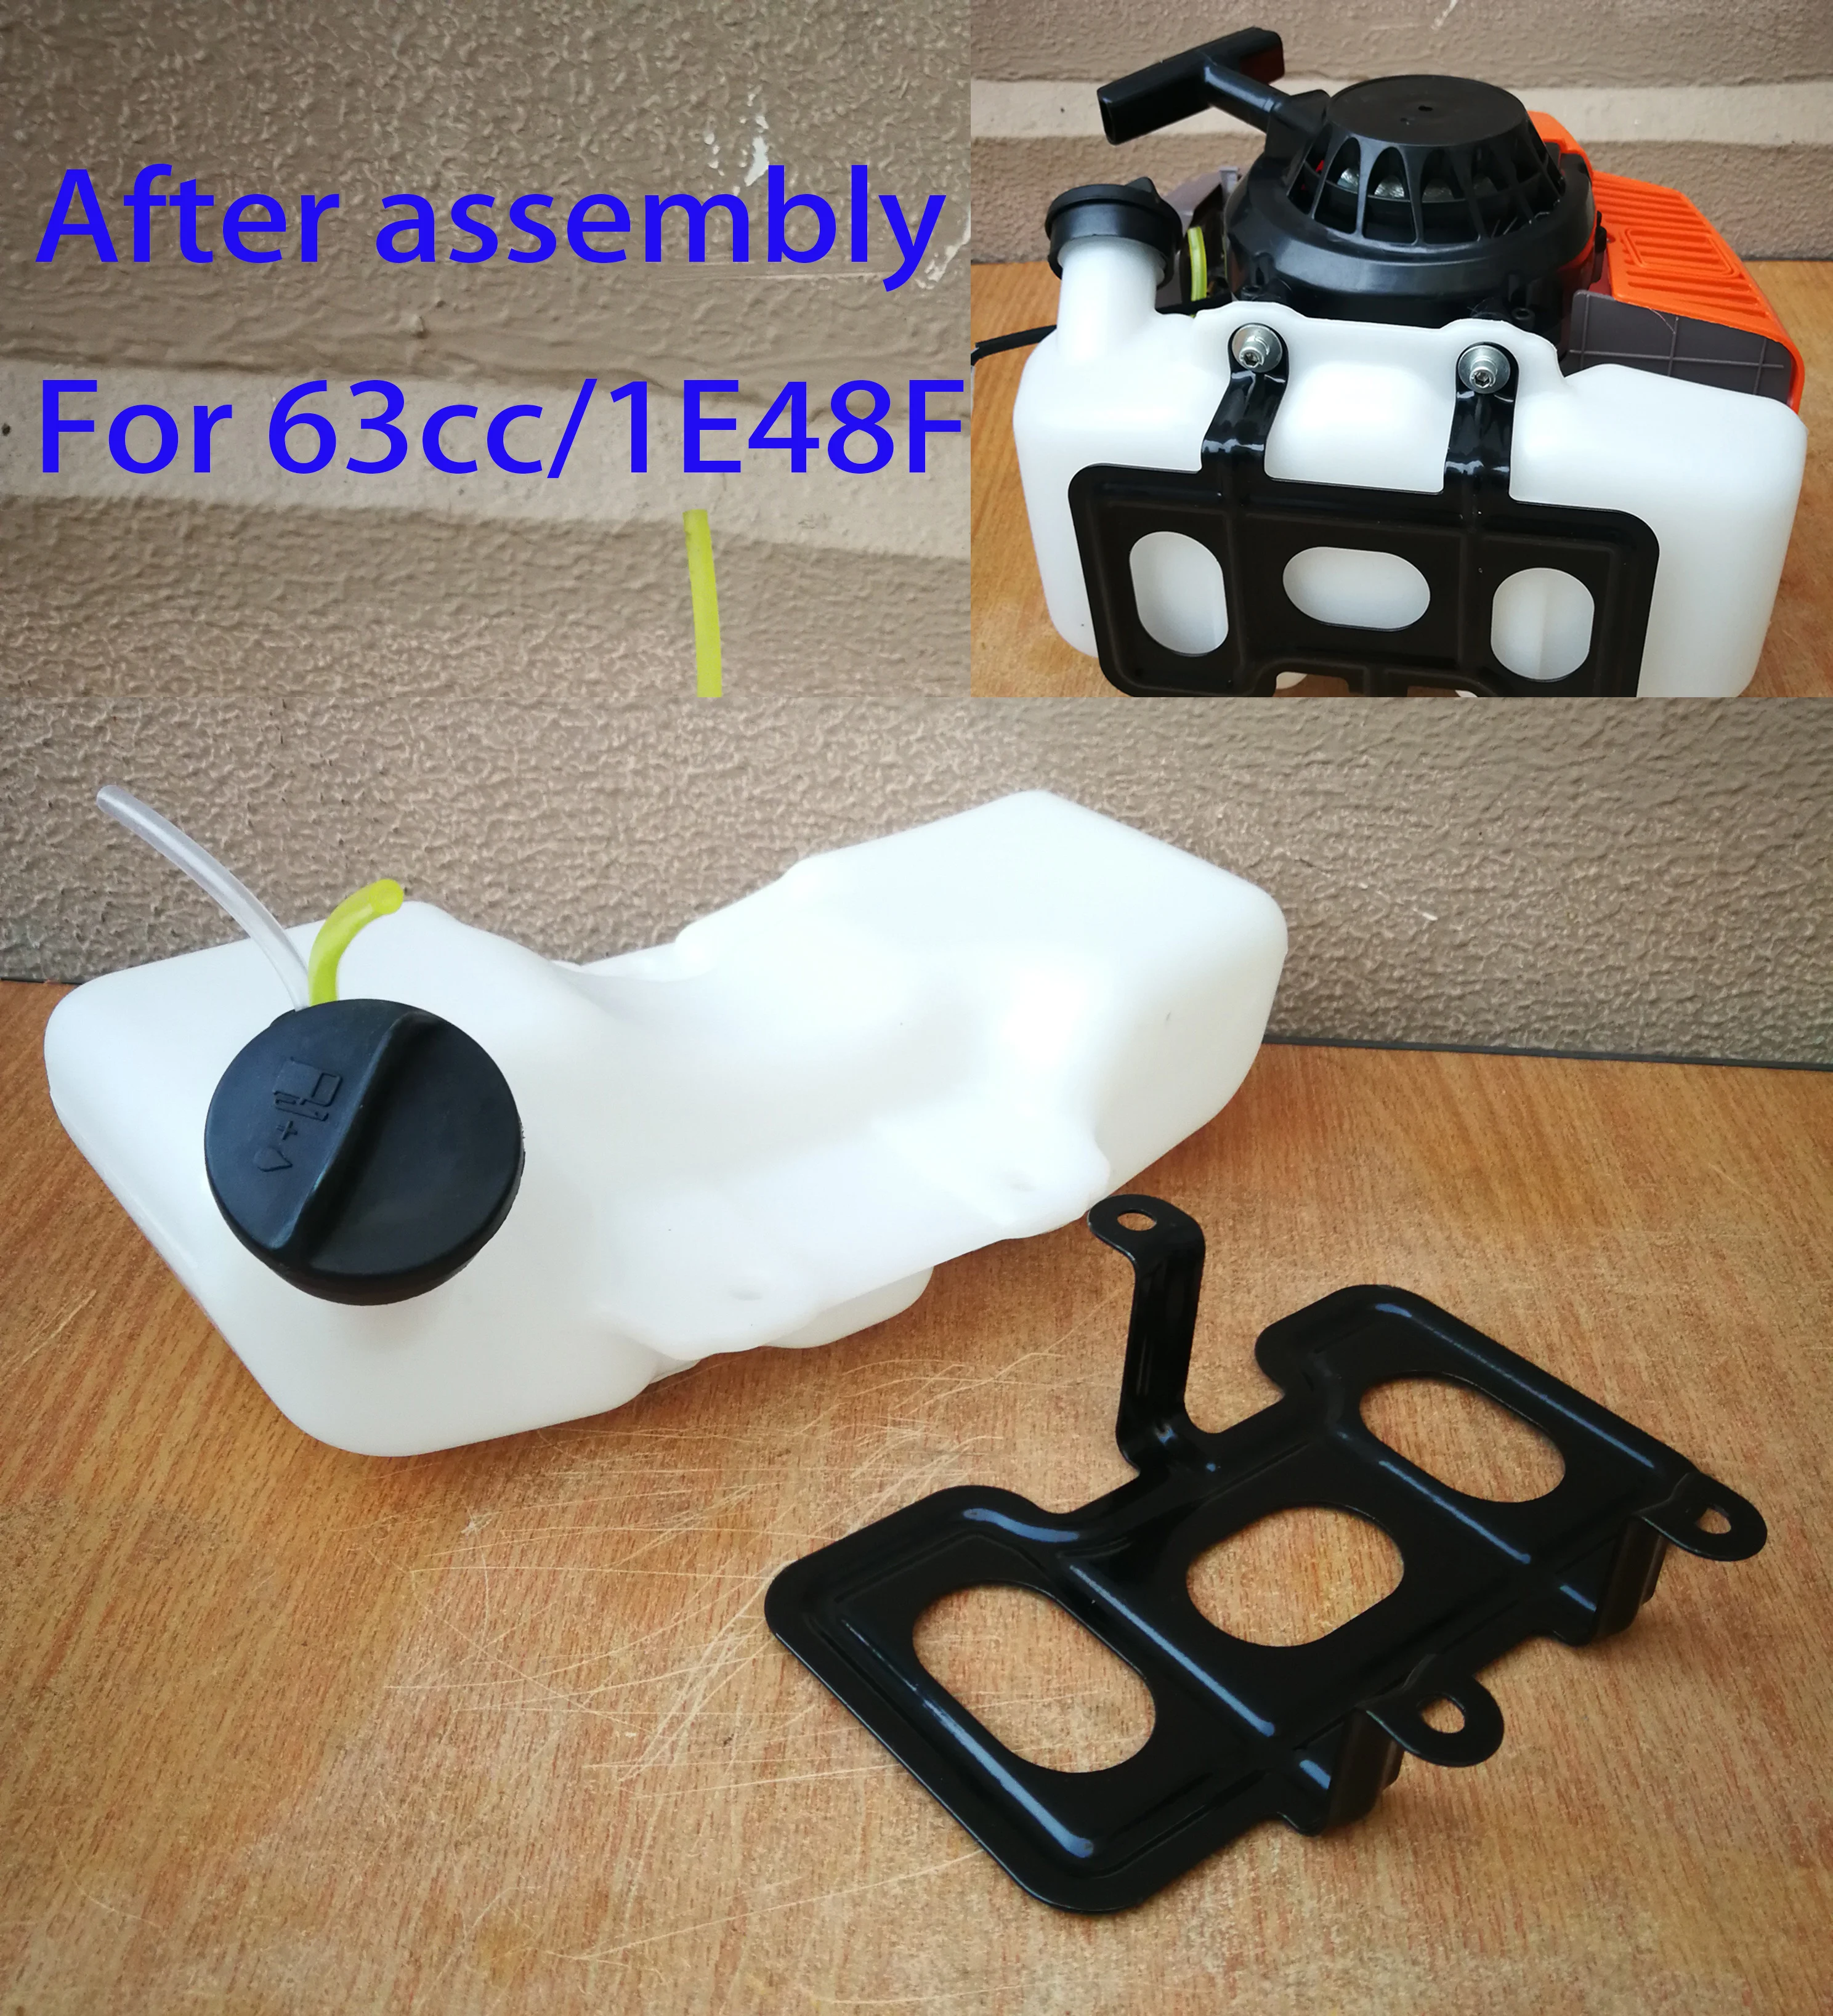 Enlarge 2T 63cc 1E48F Engine Metal Protector Support Seat Mount for Fuel Tank Mix Gasoline Case